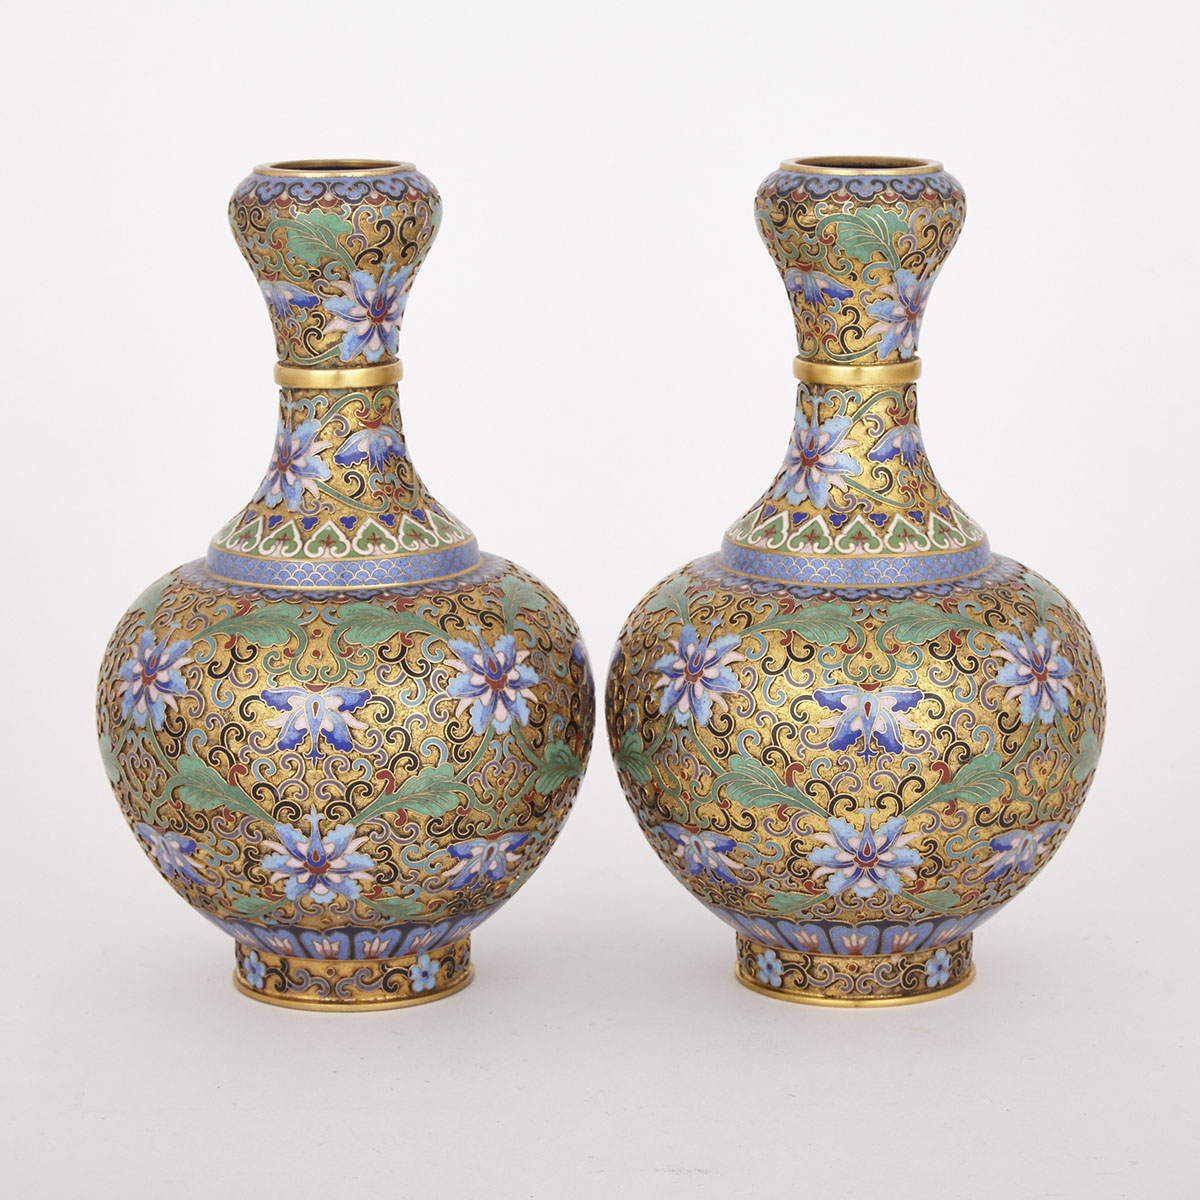 Pair of Canton Style Garlic-Headed Champleve Vases, 20th Century